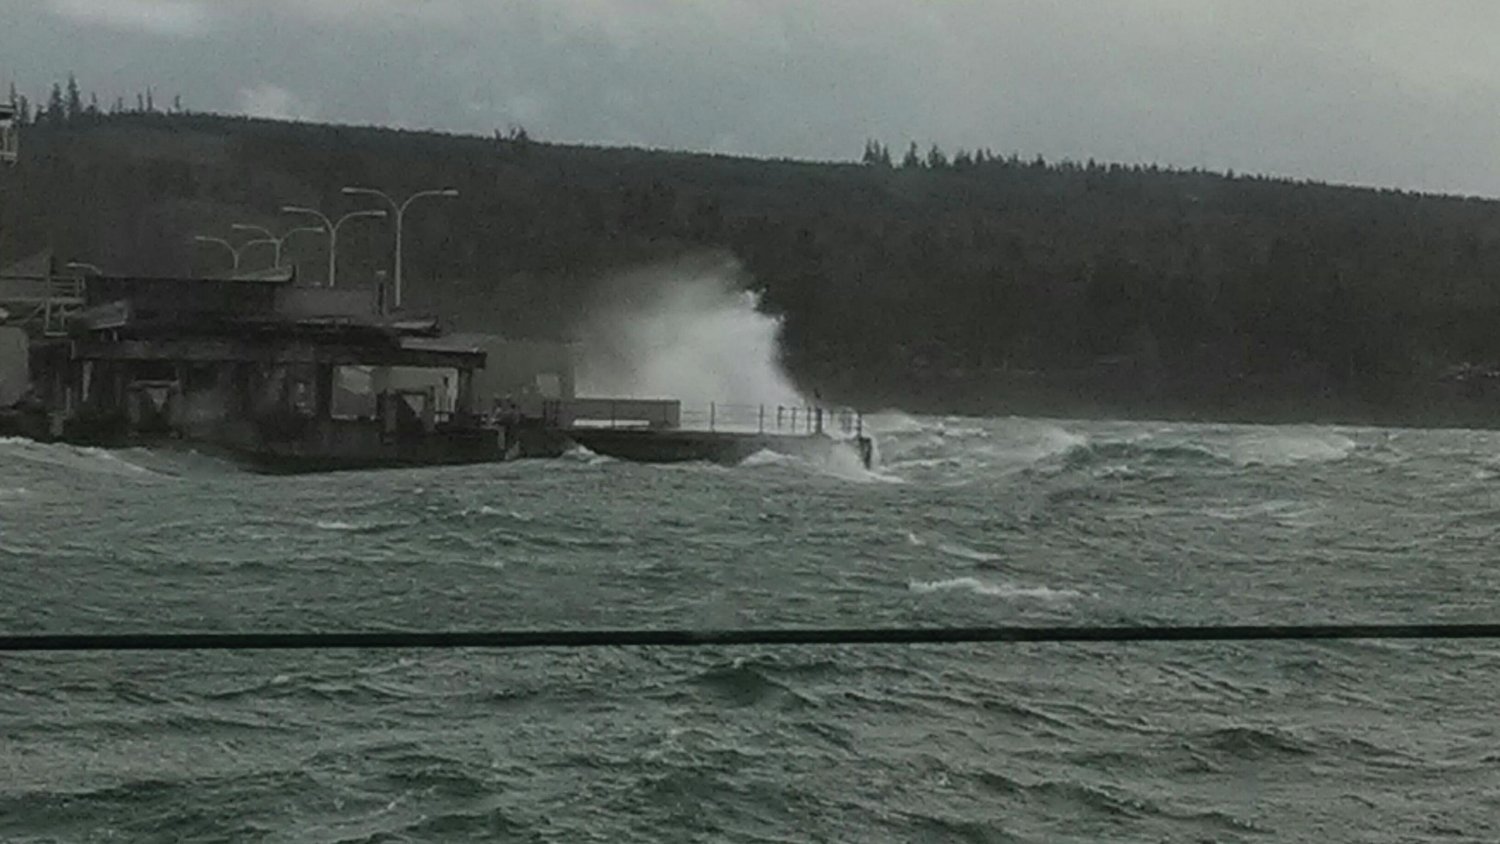 The waves going onto the Hood Canal Bridge deck  Tuesday morning were reaching nearly 30 feet in the air, officials said.  